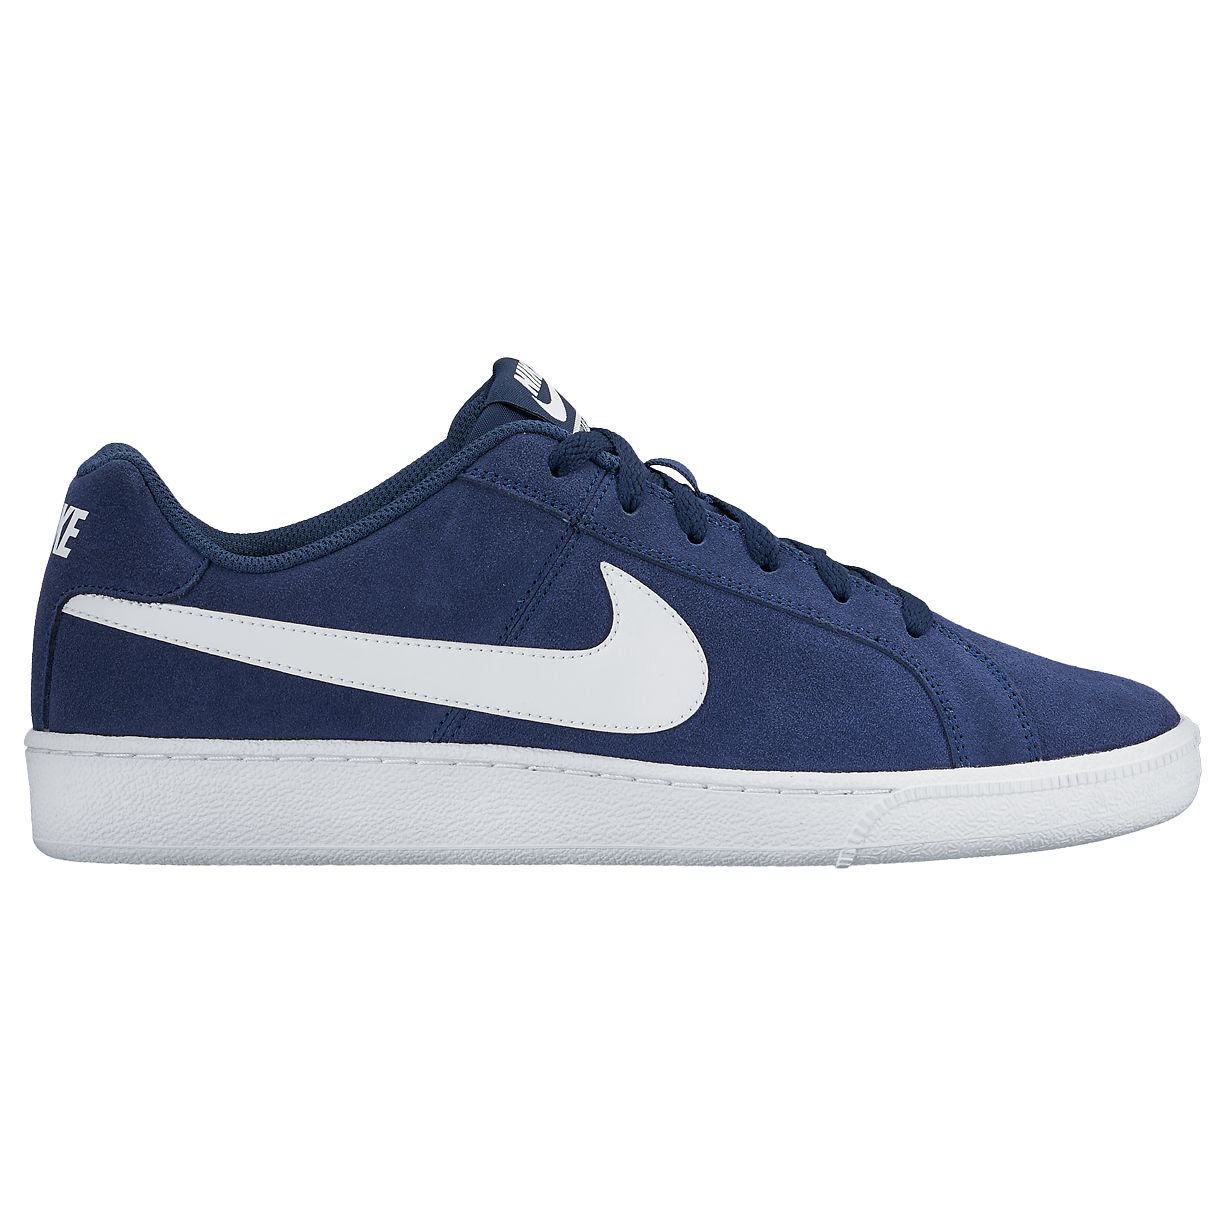 Nike Court Royale Suede Men s Trainer Navy/White at John Lewis Partners